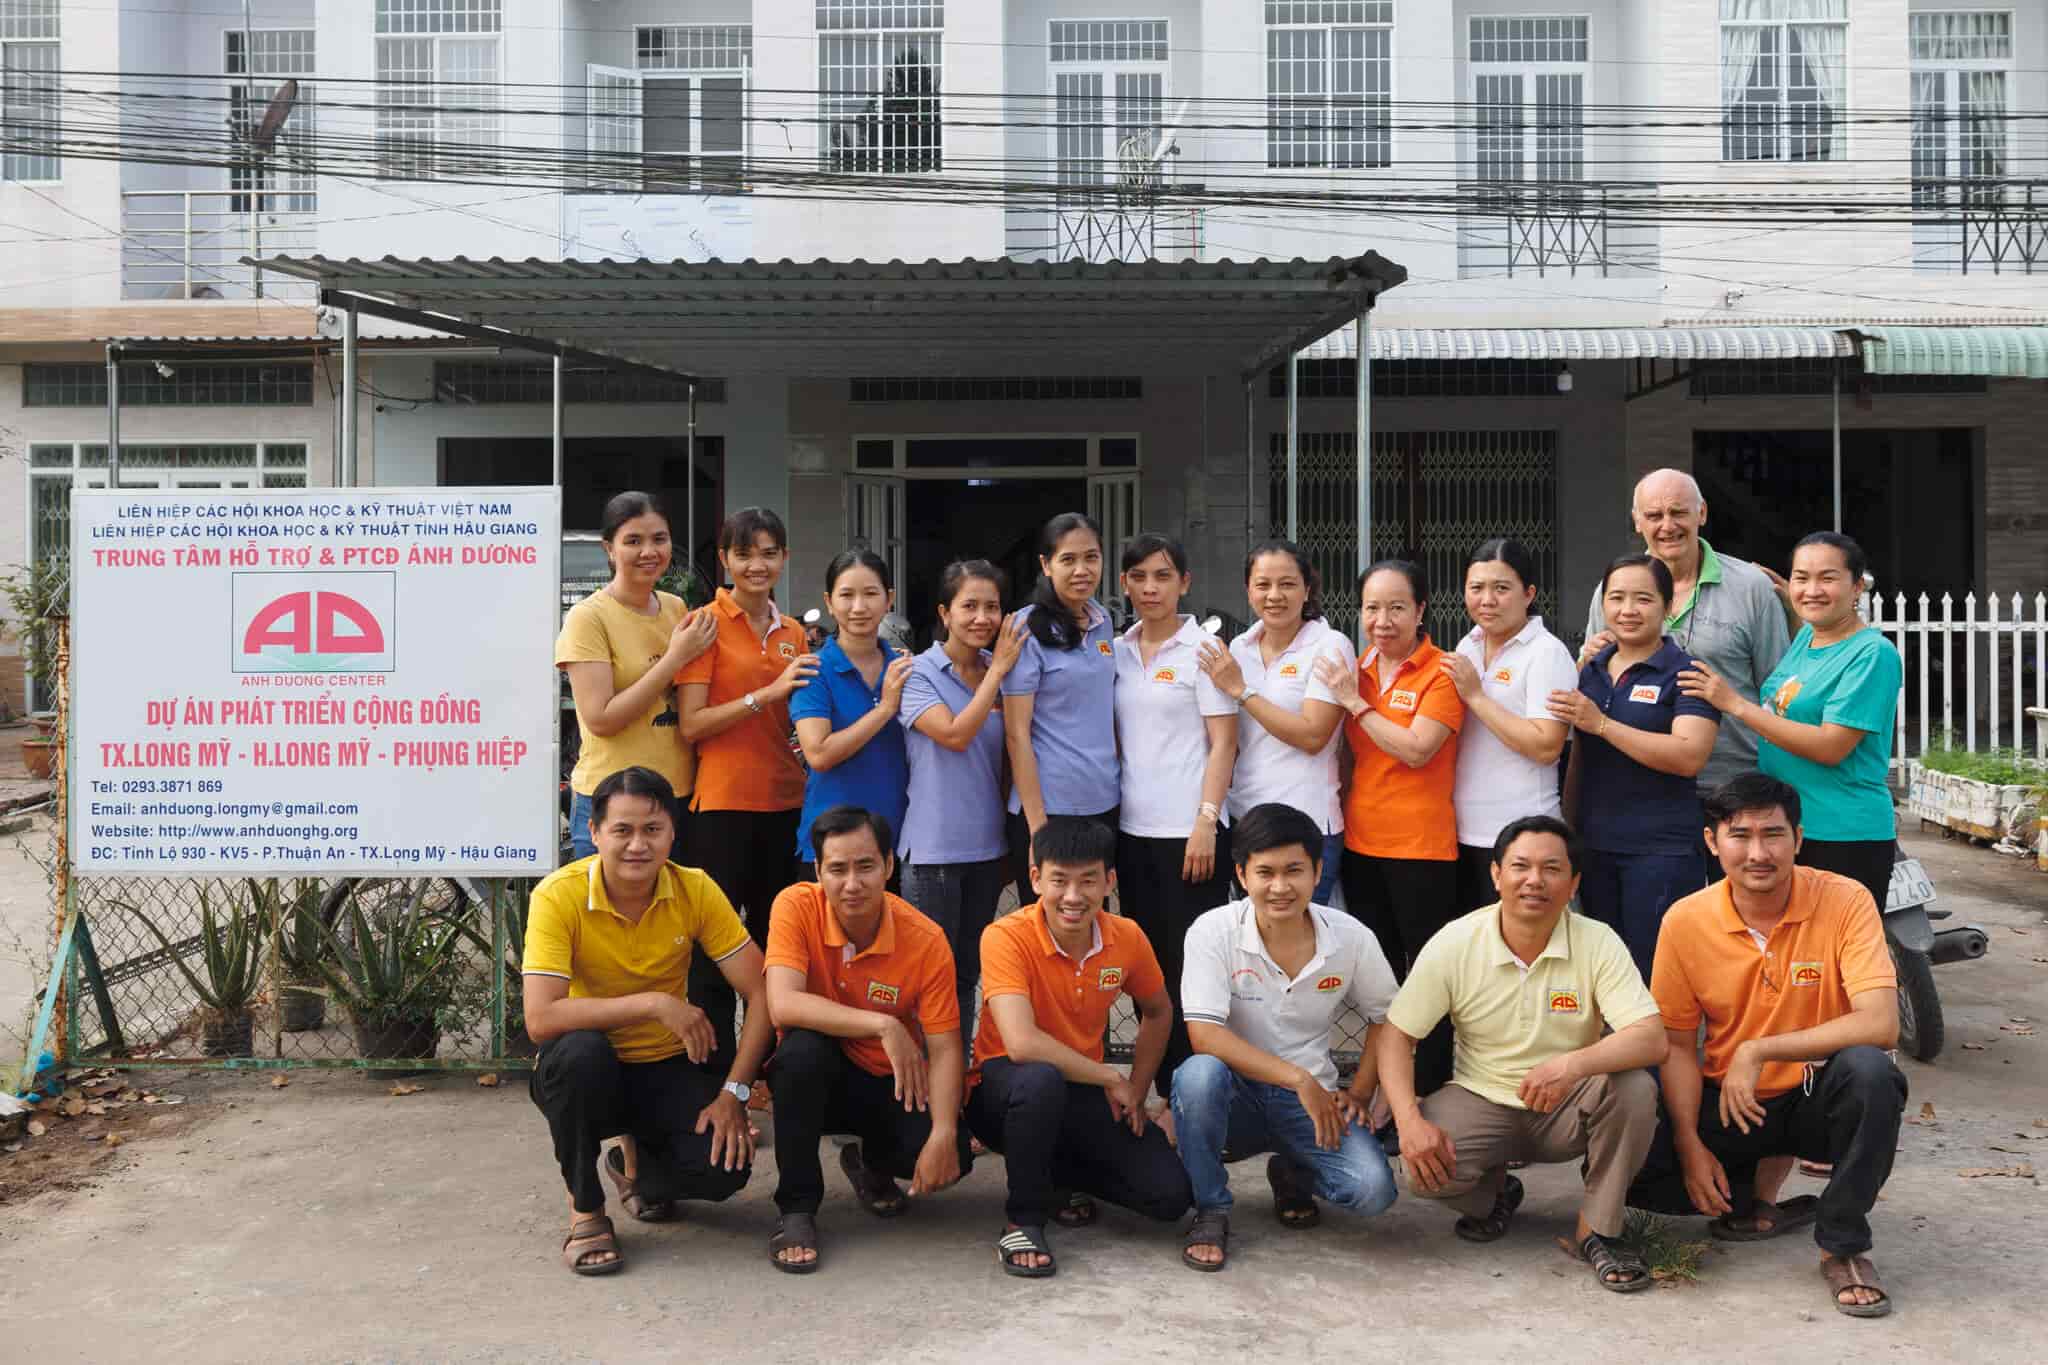 Working with local NGO Ánh Dương centre, Mekong Plus also provides healthcare and education programmes to the communities. Photo by Mervin Lee